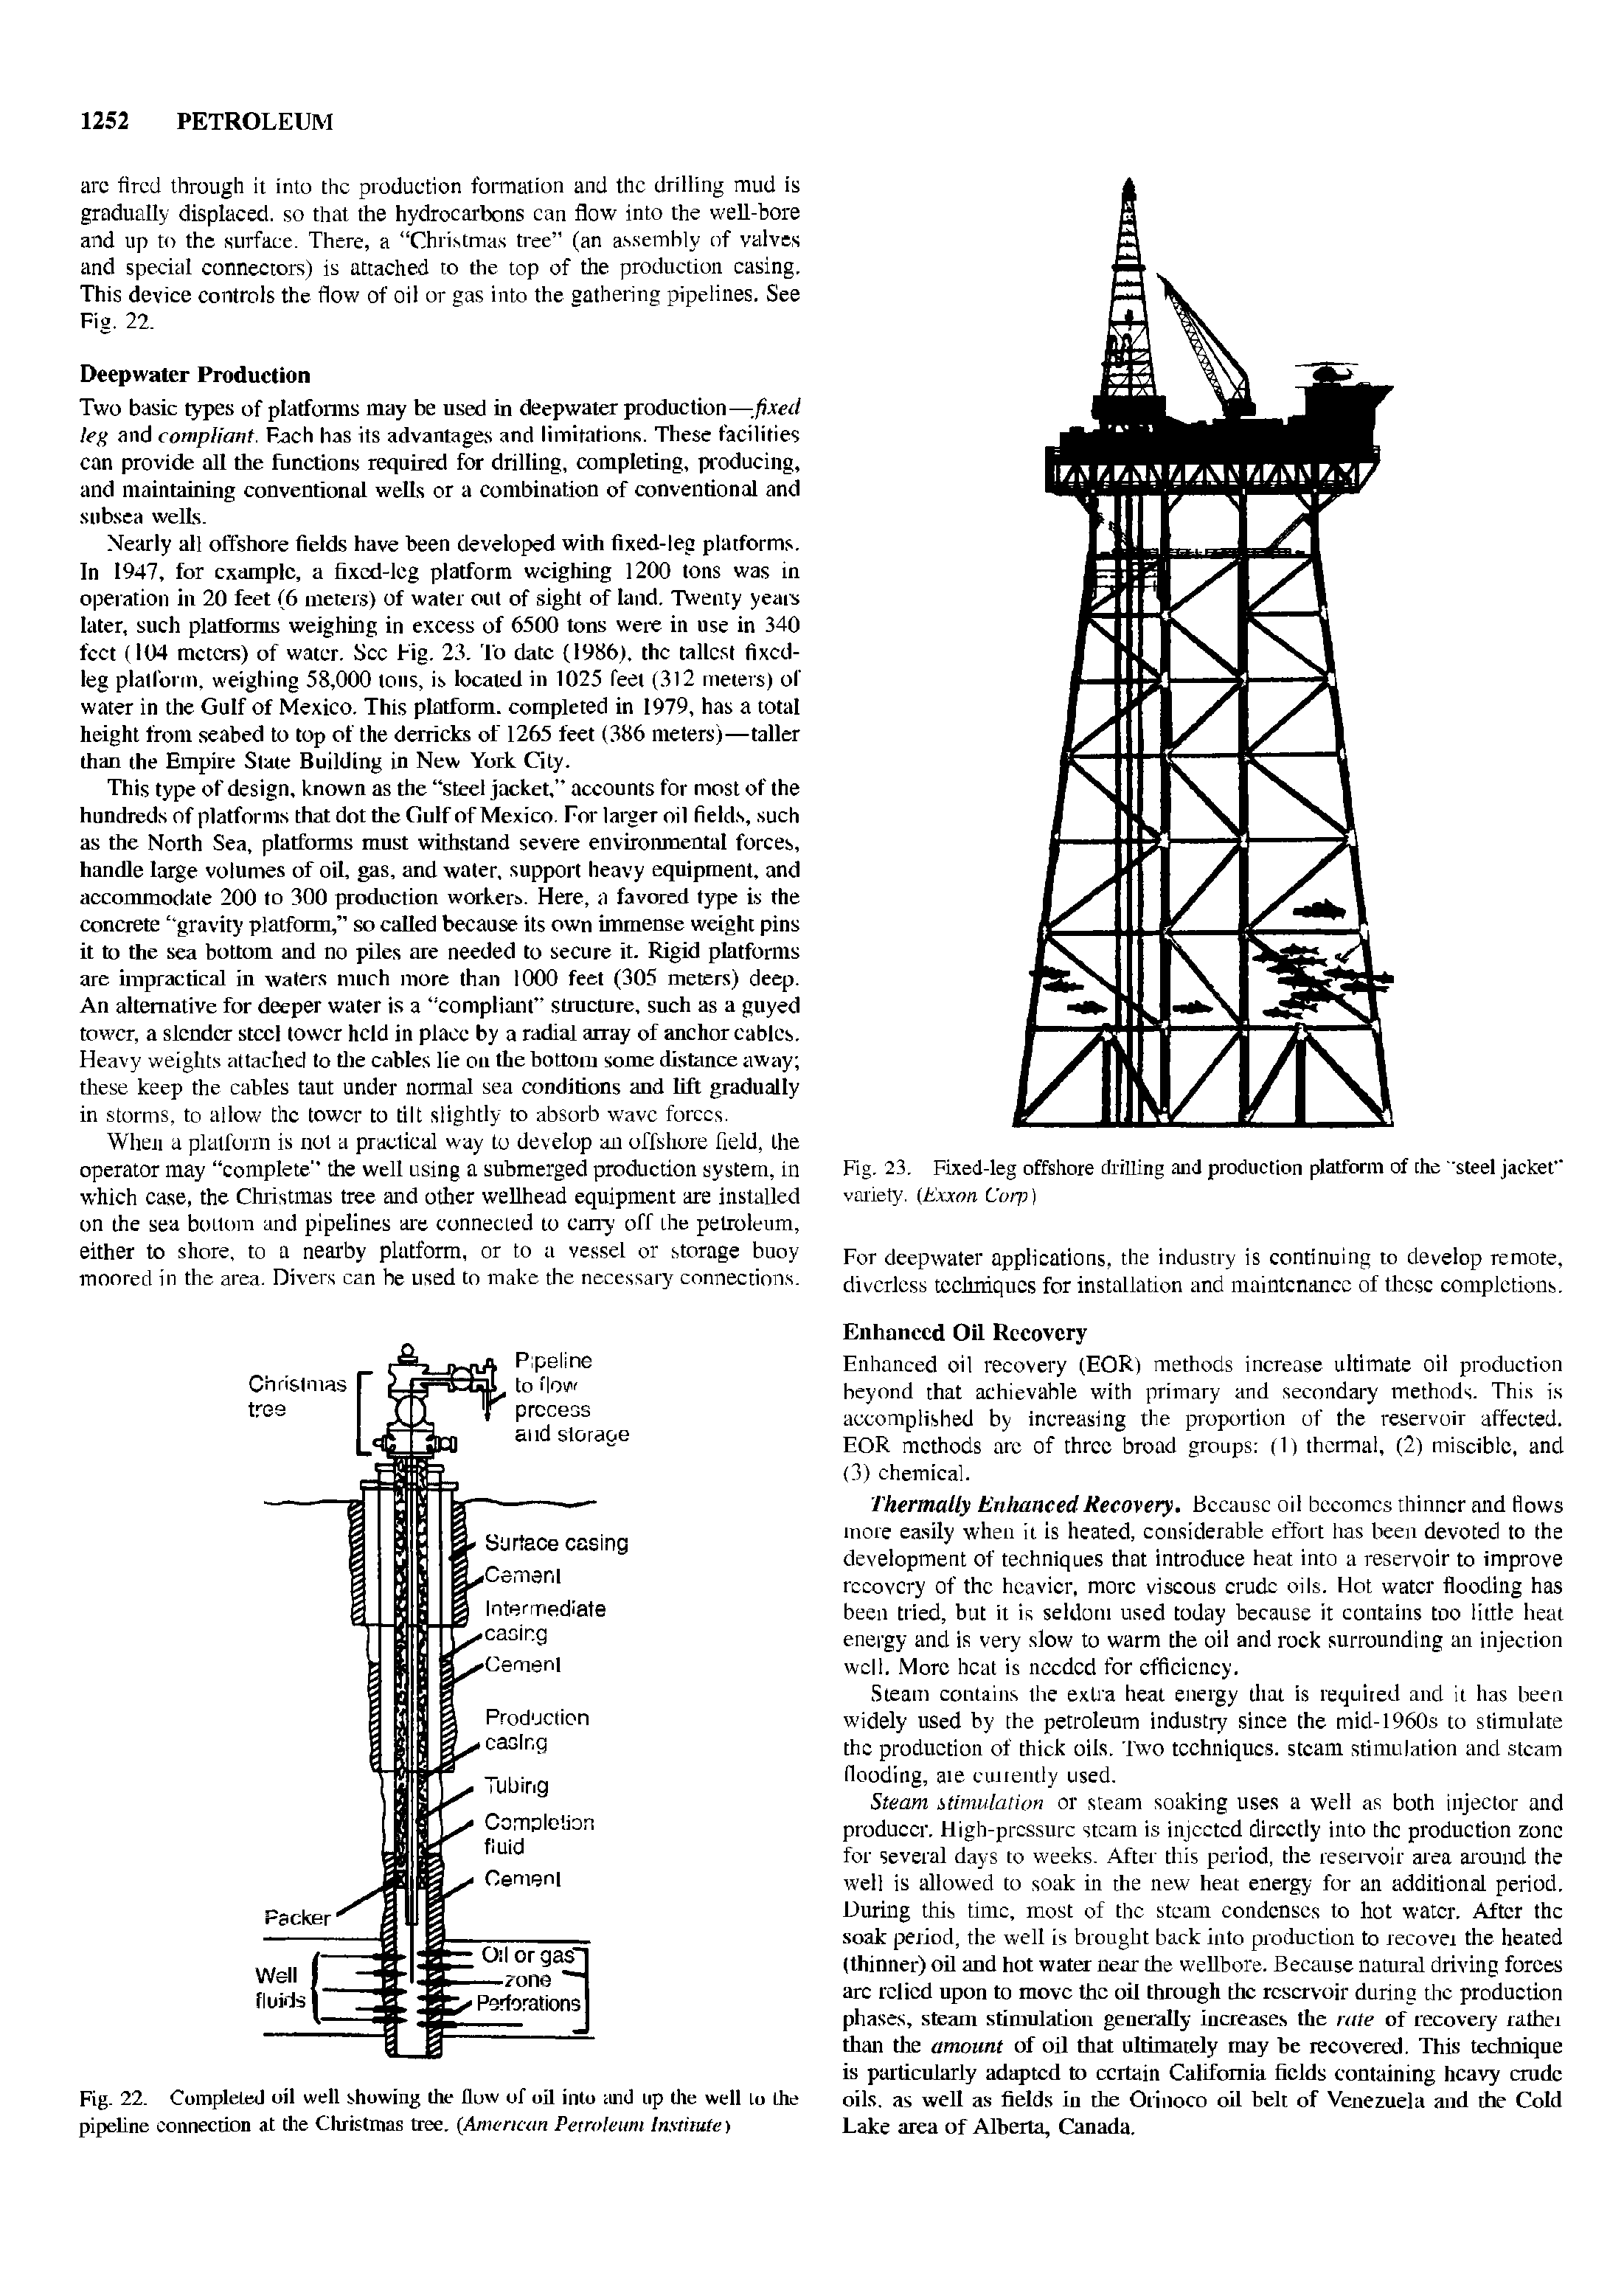 Fig. 22. Completed oil well showing the Iluw of oil into and up tile well Lo the pipeline connection at die Christmas tree. (American Petroleum Institute)...